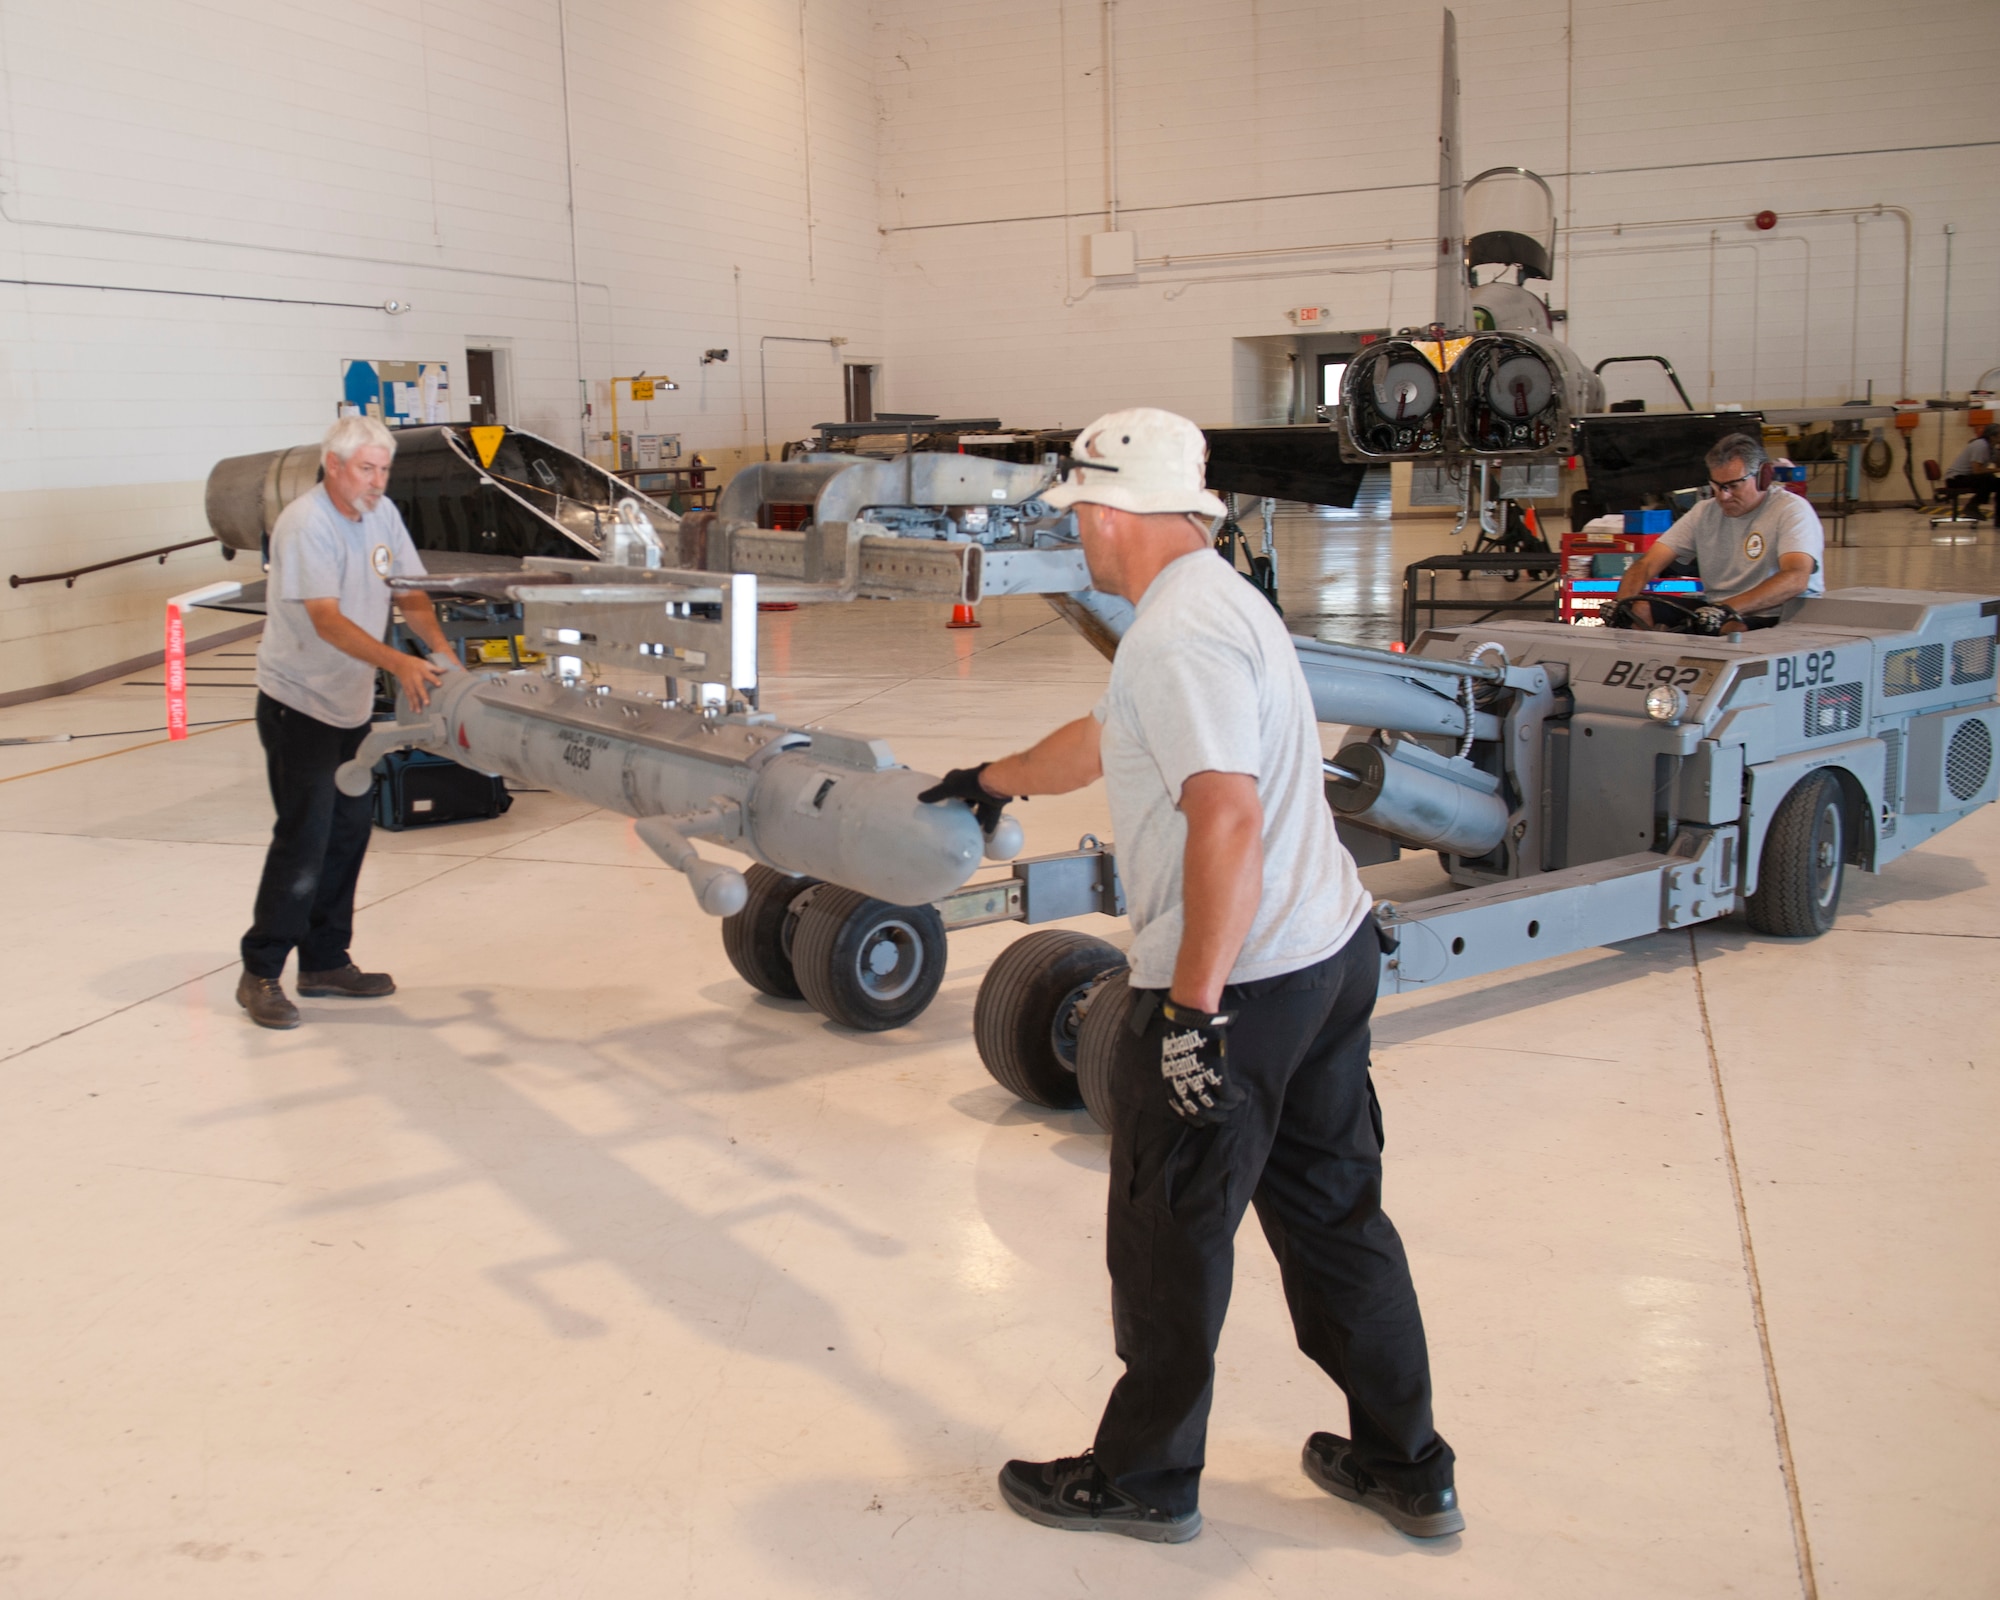 Ronald Legand, and Jeremy Hale, both M1 Support Services maintainers, prepare to load a radar jammer pod onto a T-38 Talon at Holloman Air Force Base, N.M., Jun 4. For the first time, the T-38 has been modified to fit the ALQ-188 pod for use as a radar jammer. This newest addition to the T-38 will assist in its training mission by making it a more effective adversary for the F-22 Raptor during simulated combat exercises. (U.S. Air Force photo by Airman 1st Class Daniel E. Liddicoet/Released)
